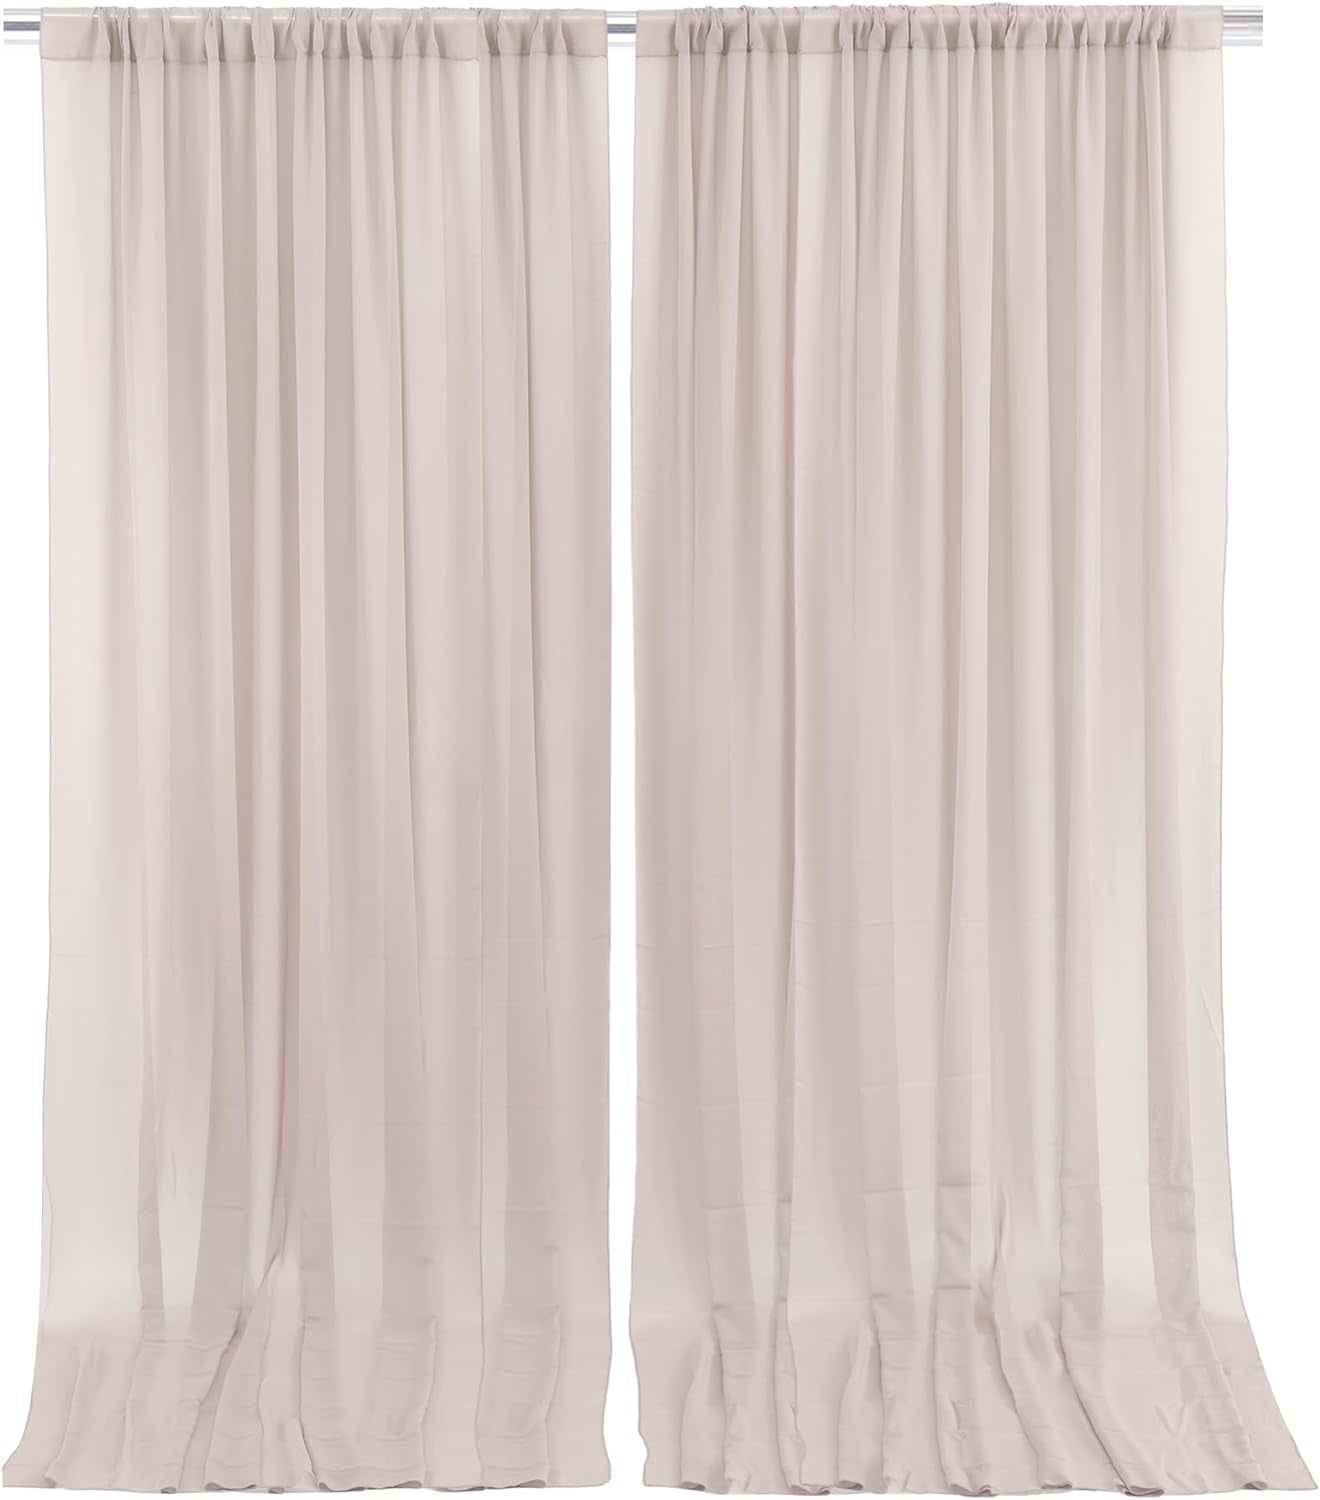 10Ft X 10Ft White Chiffon Backdrop Curtains, Wrinkle-Free Sheer Chiffon Fabric Curtain Drapes for Wedding Ceremony Arch Party Stage Decoration  Wish Care Taupe  